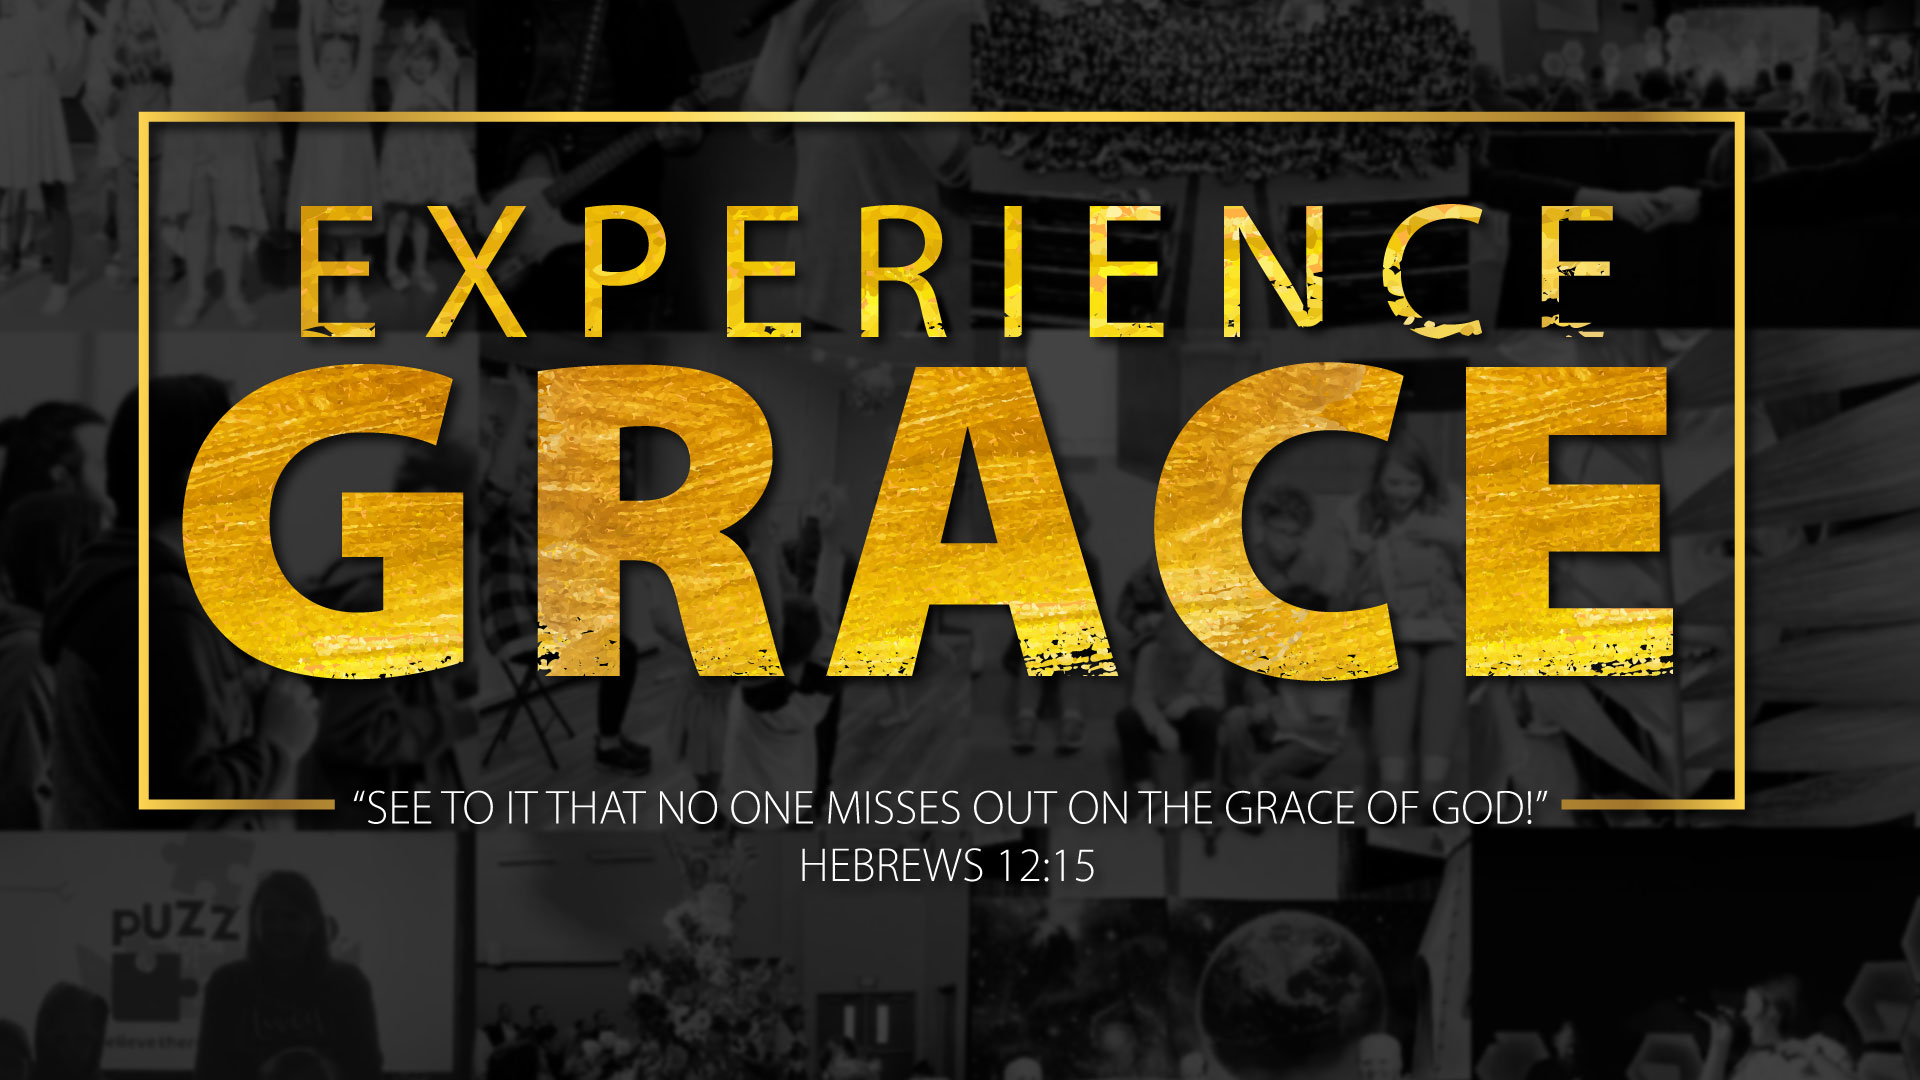 Grace for All